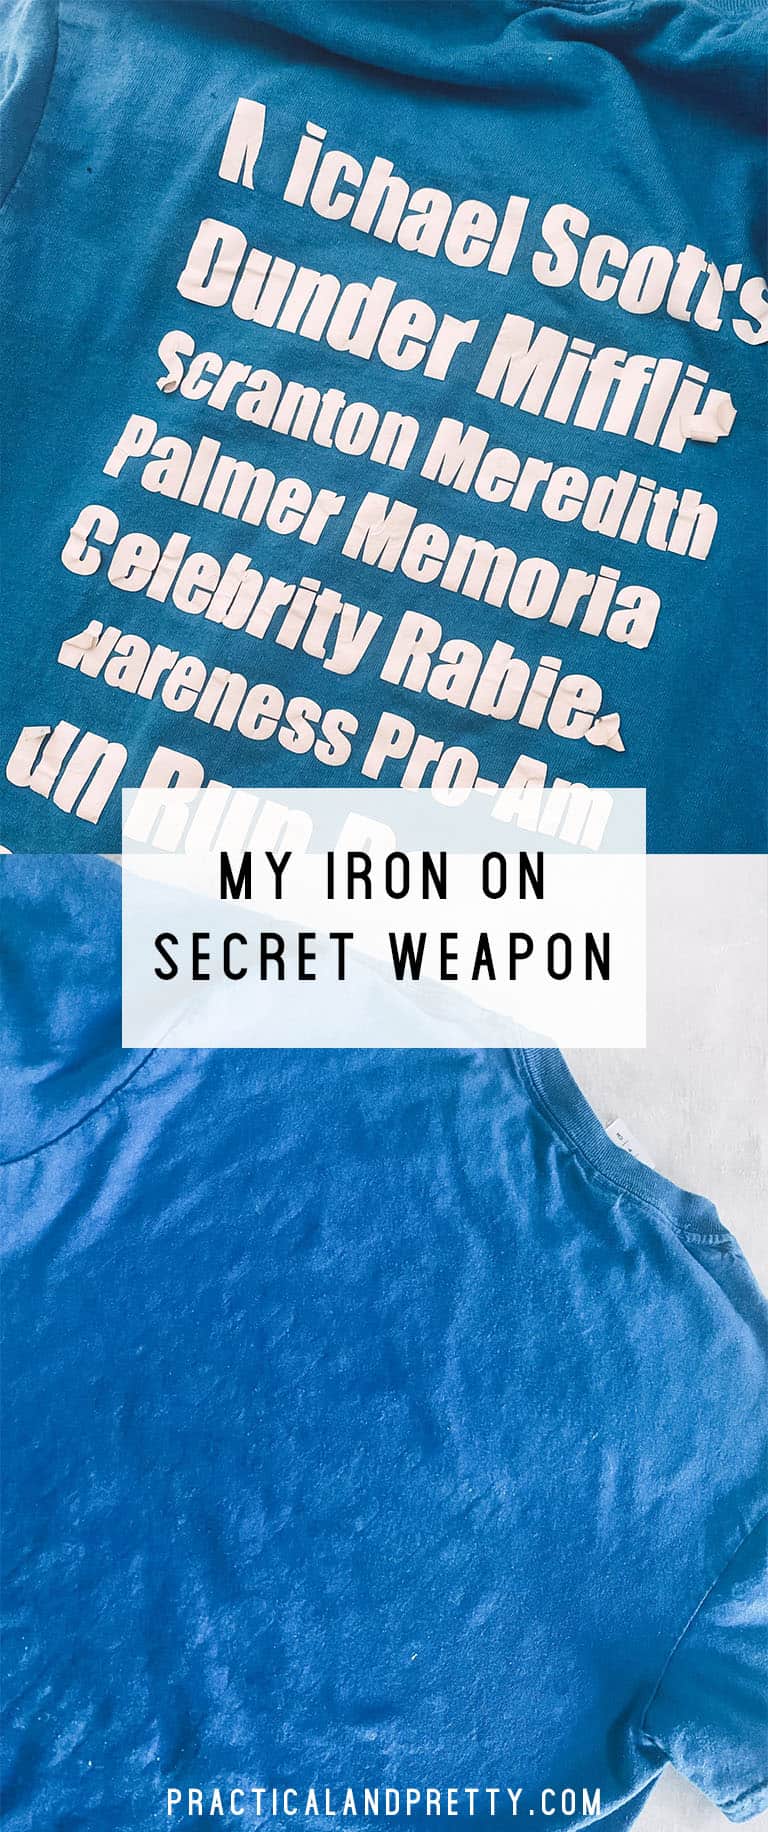 In this tutorial I teach you how to remove iron on vinyl from any surface quickly and without damaging any fabric so you can reuse it!